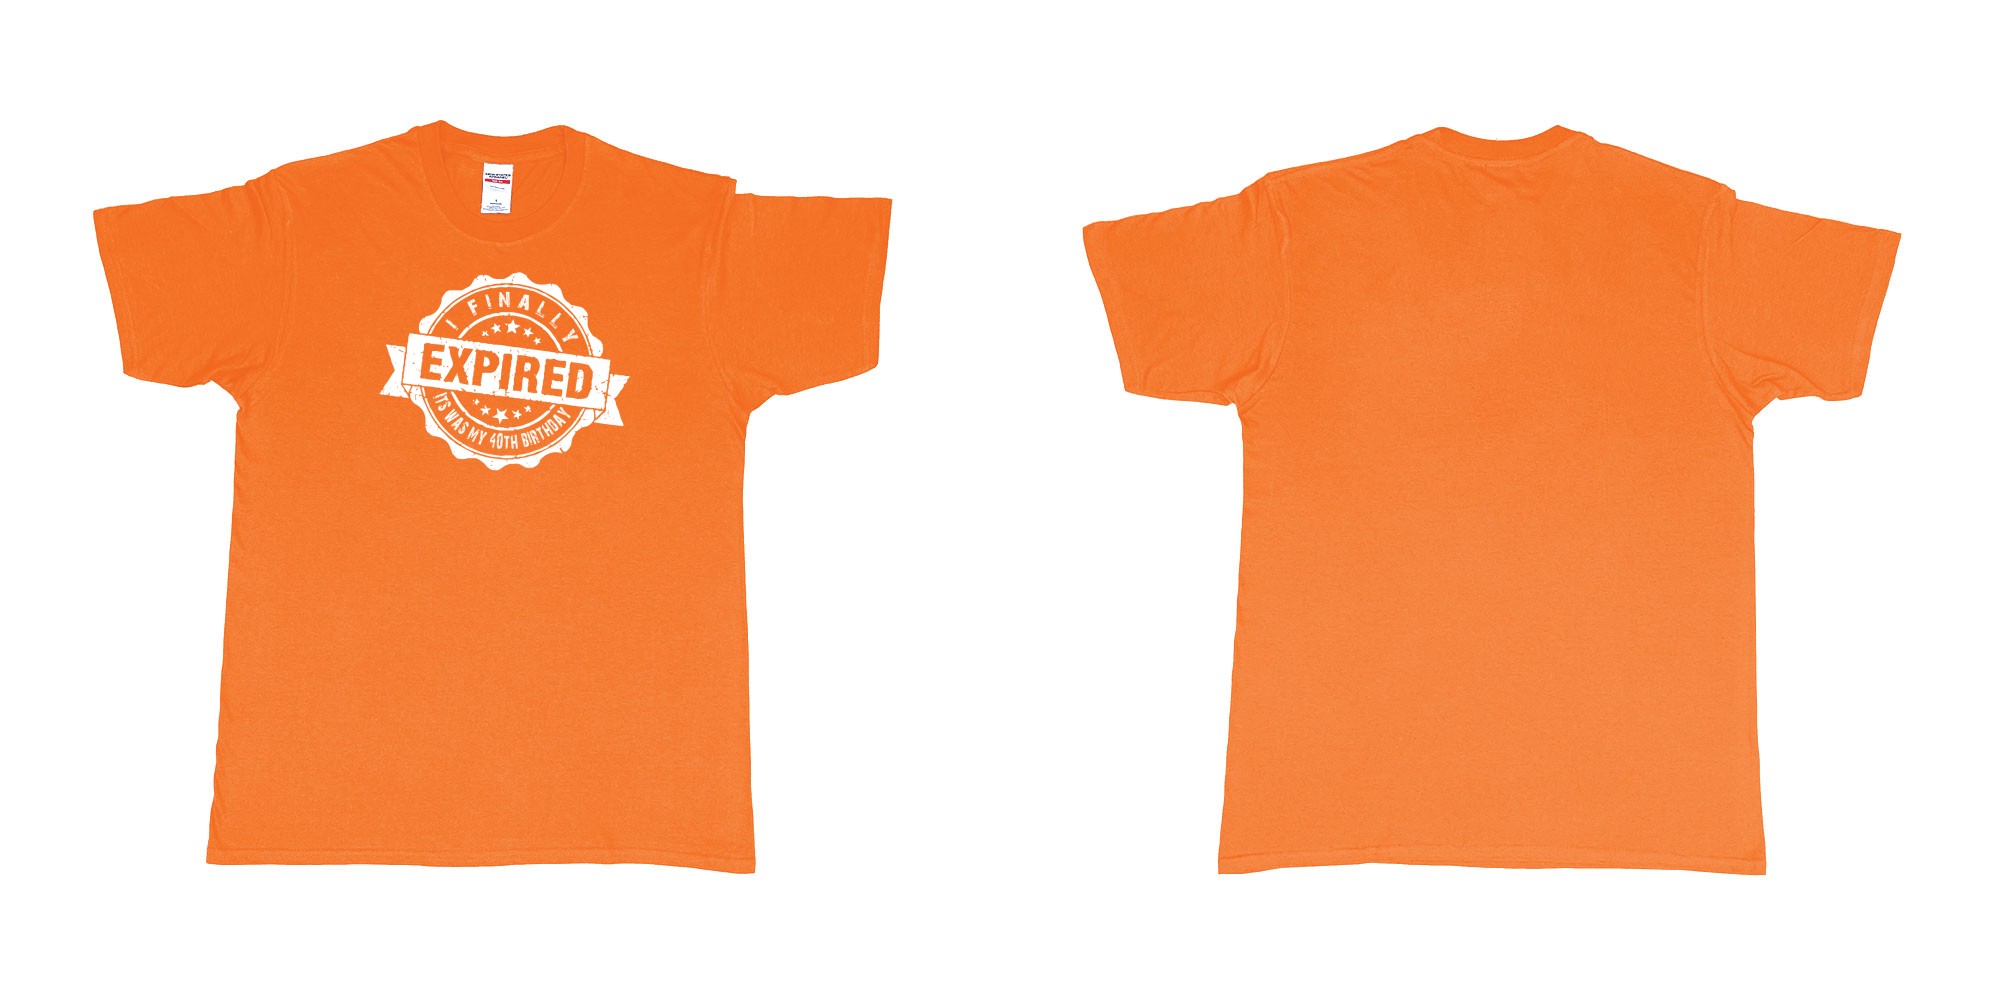 Custom tshirt design i finally expiered in fabric color orange choice your own text made in Bali by The Pirate Way